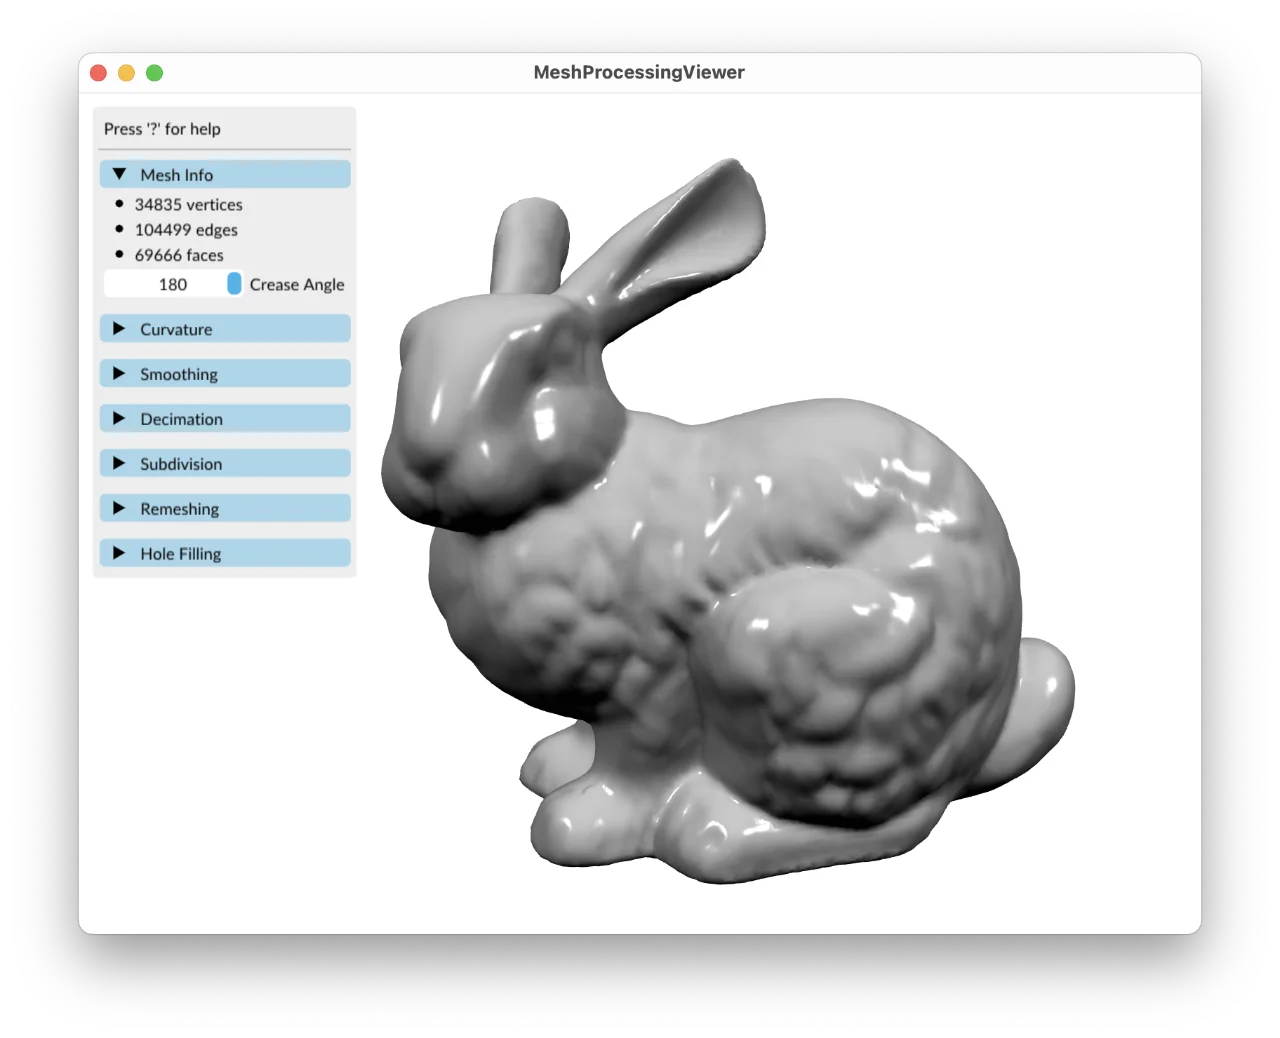 MeshProcessingViewer showing the Stanford bunny.